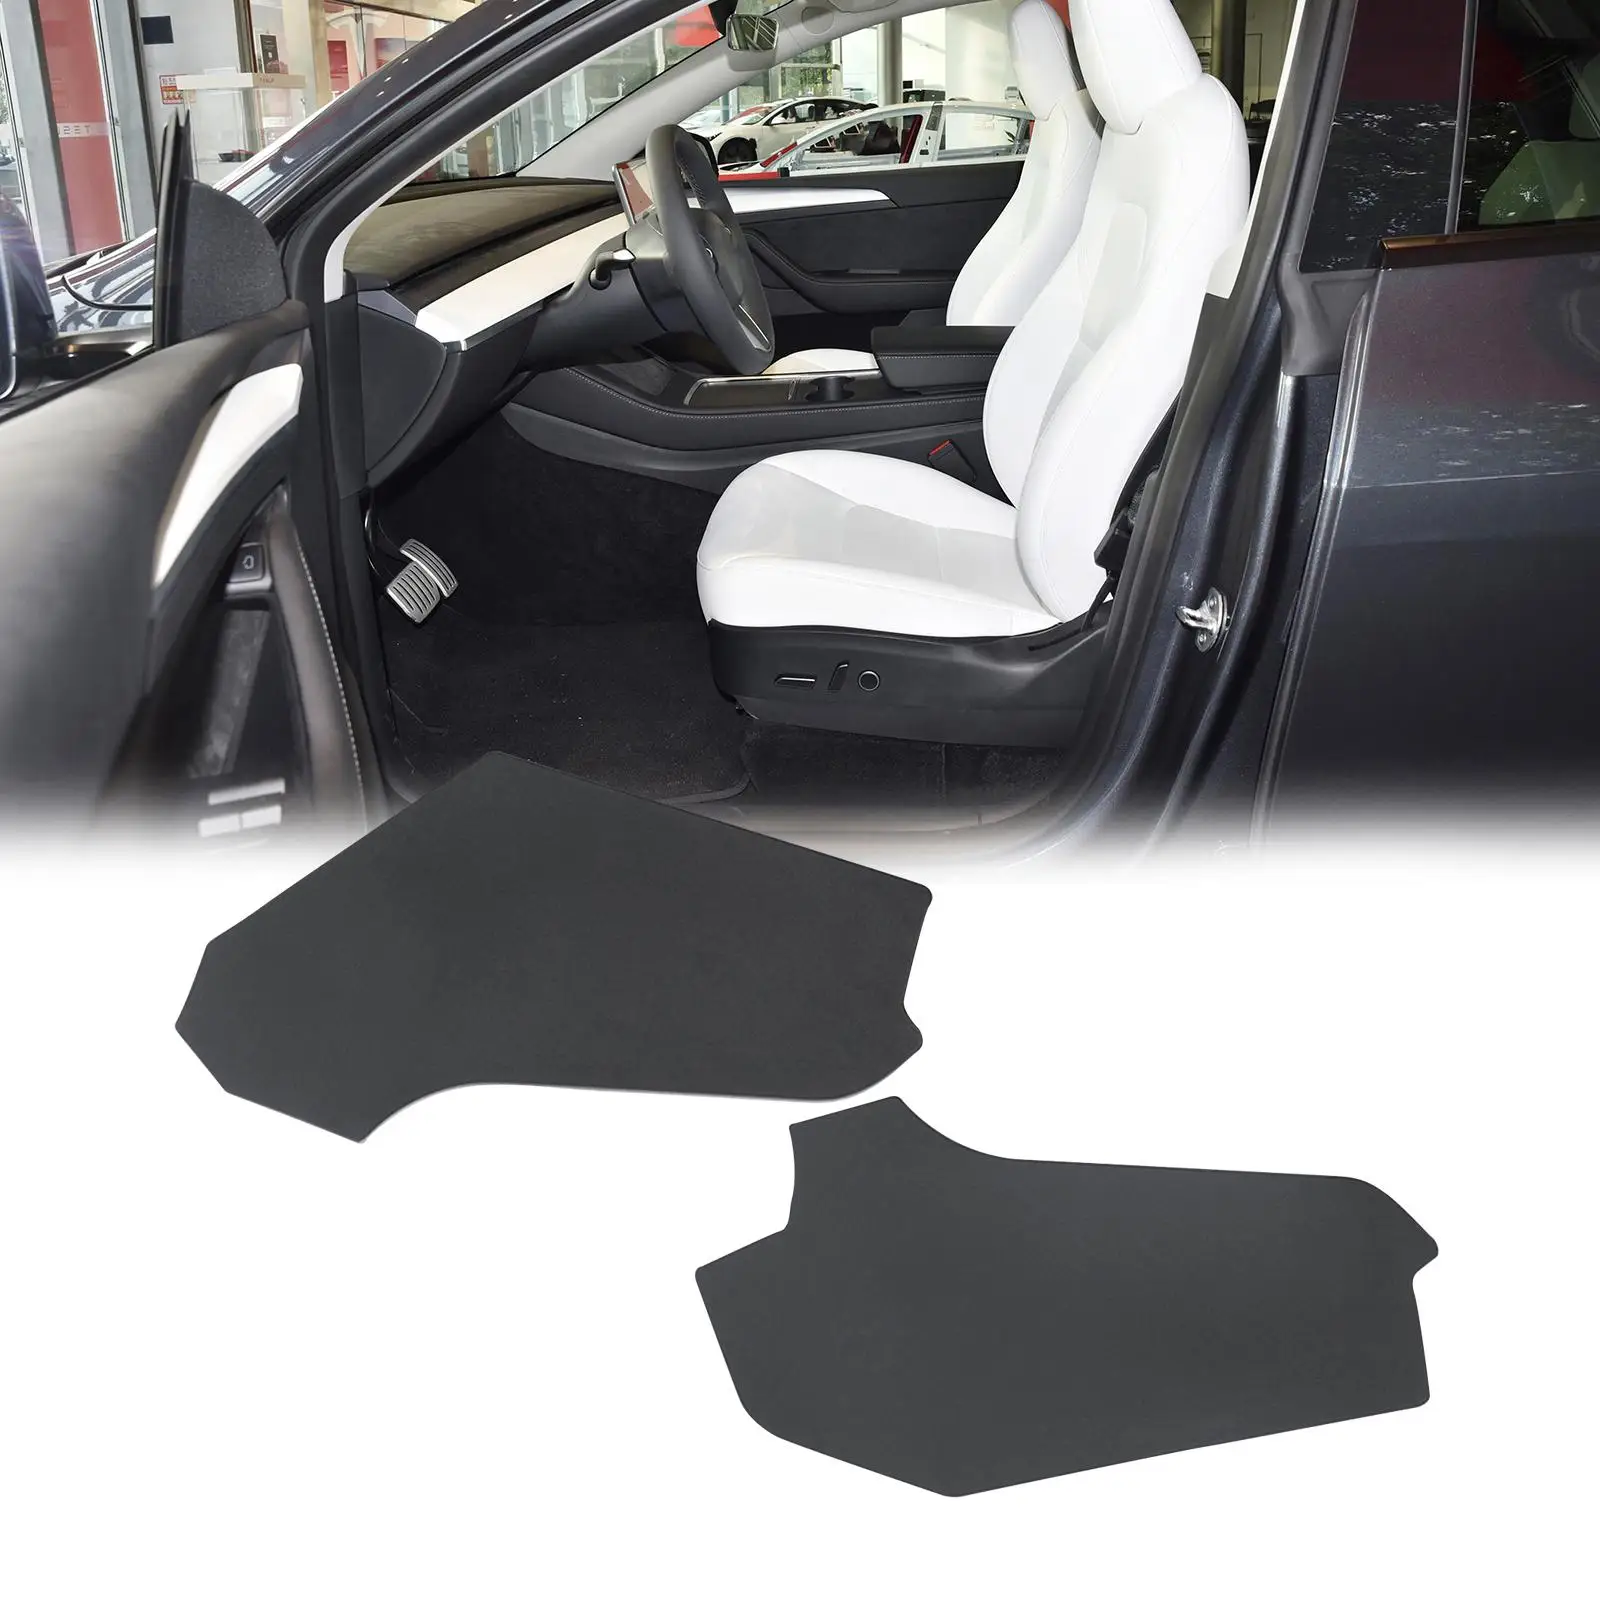 2Pcs Central Control Side Anti Kick Mat Replaces Anti Dust Mat Decoration Trim Dirt Protector Cover Pad for Tesla Model Y